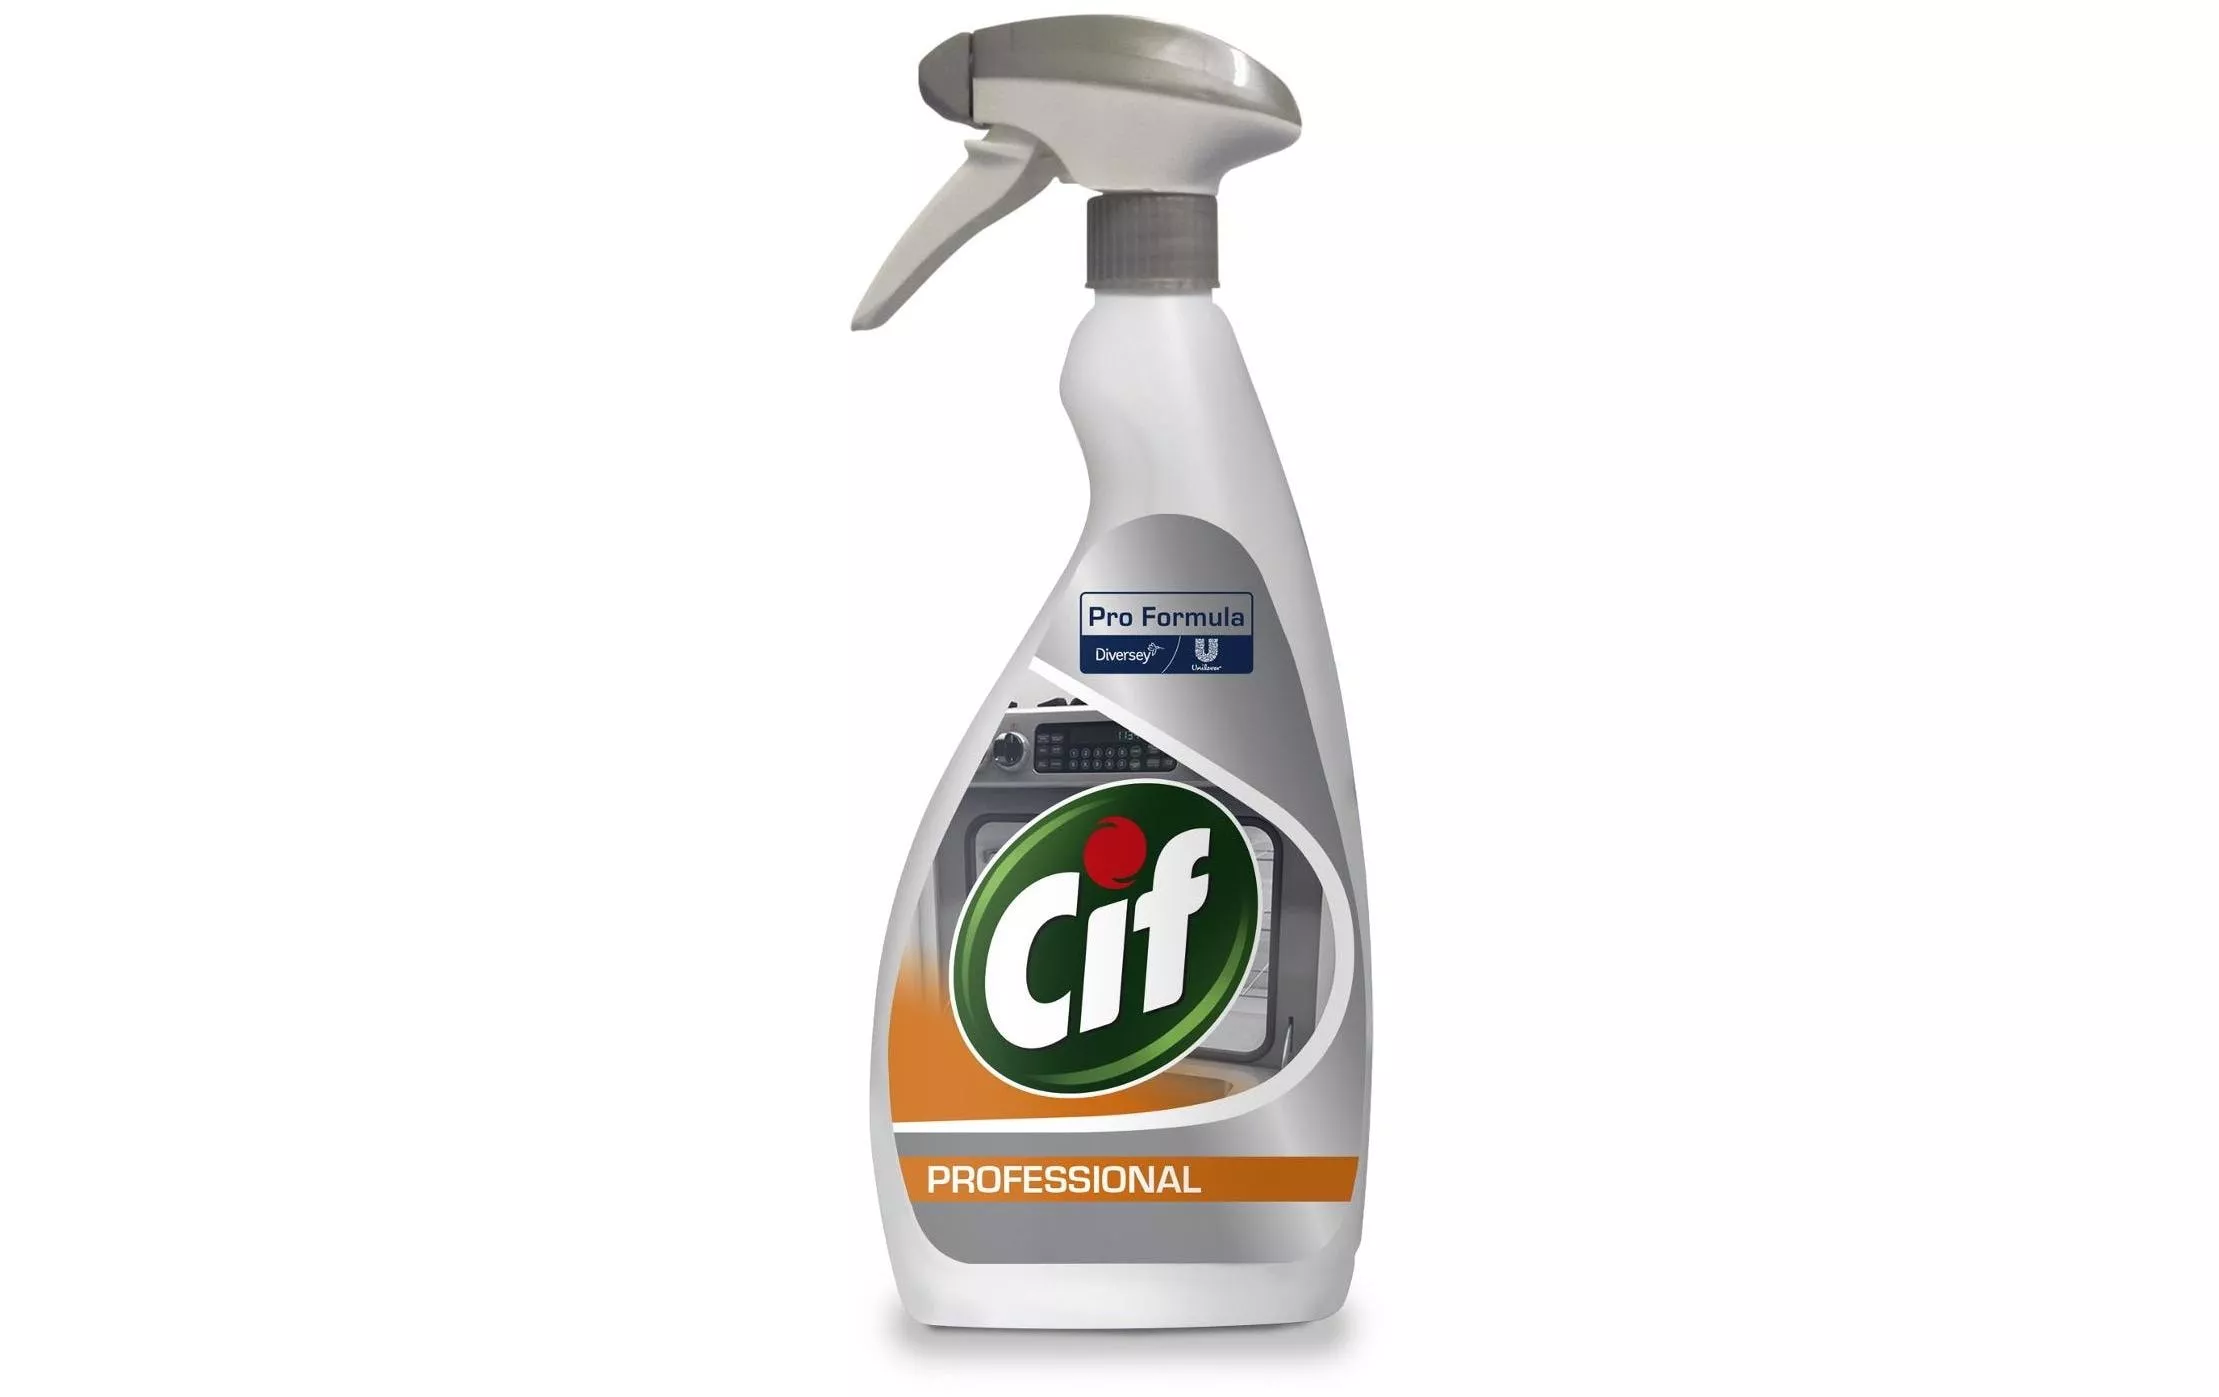 Cif Professional Oven & Grill Cleaner 750 ml